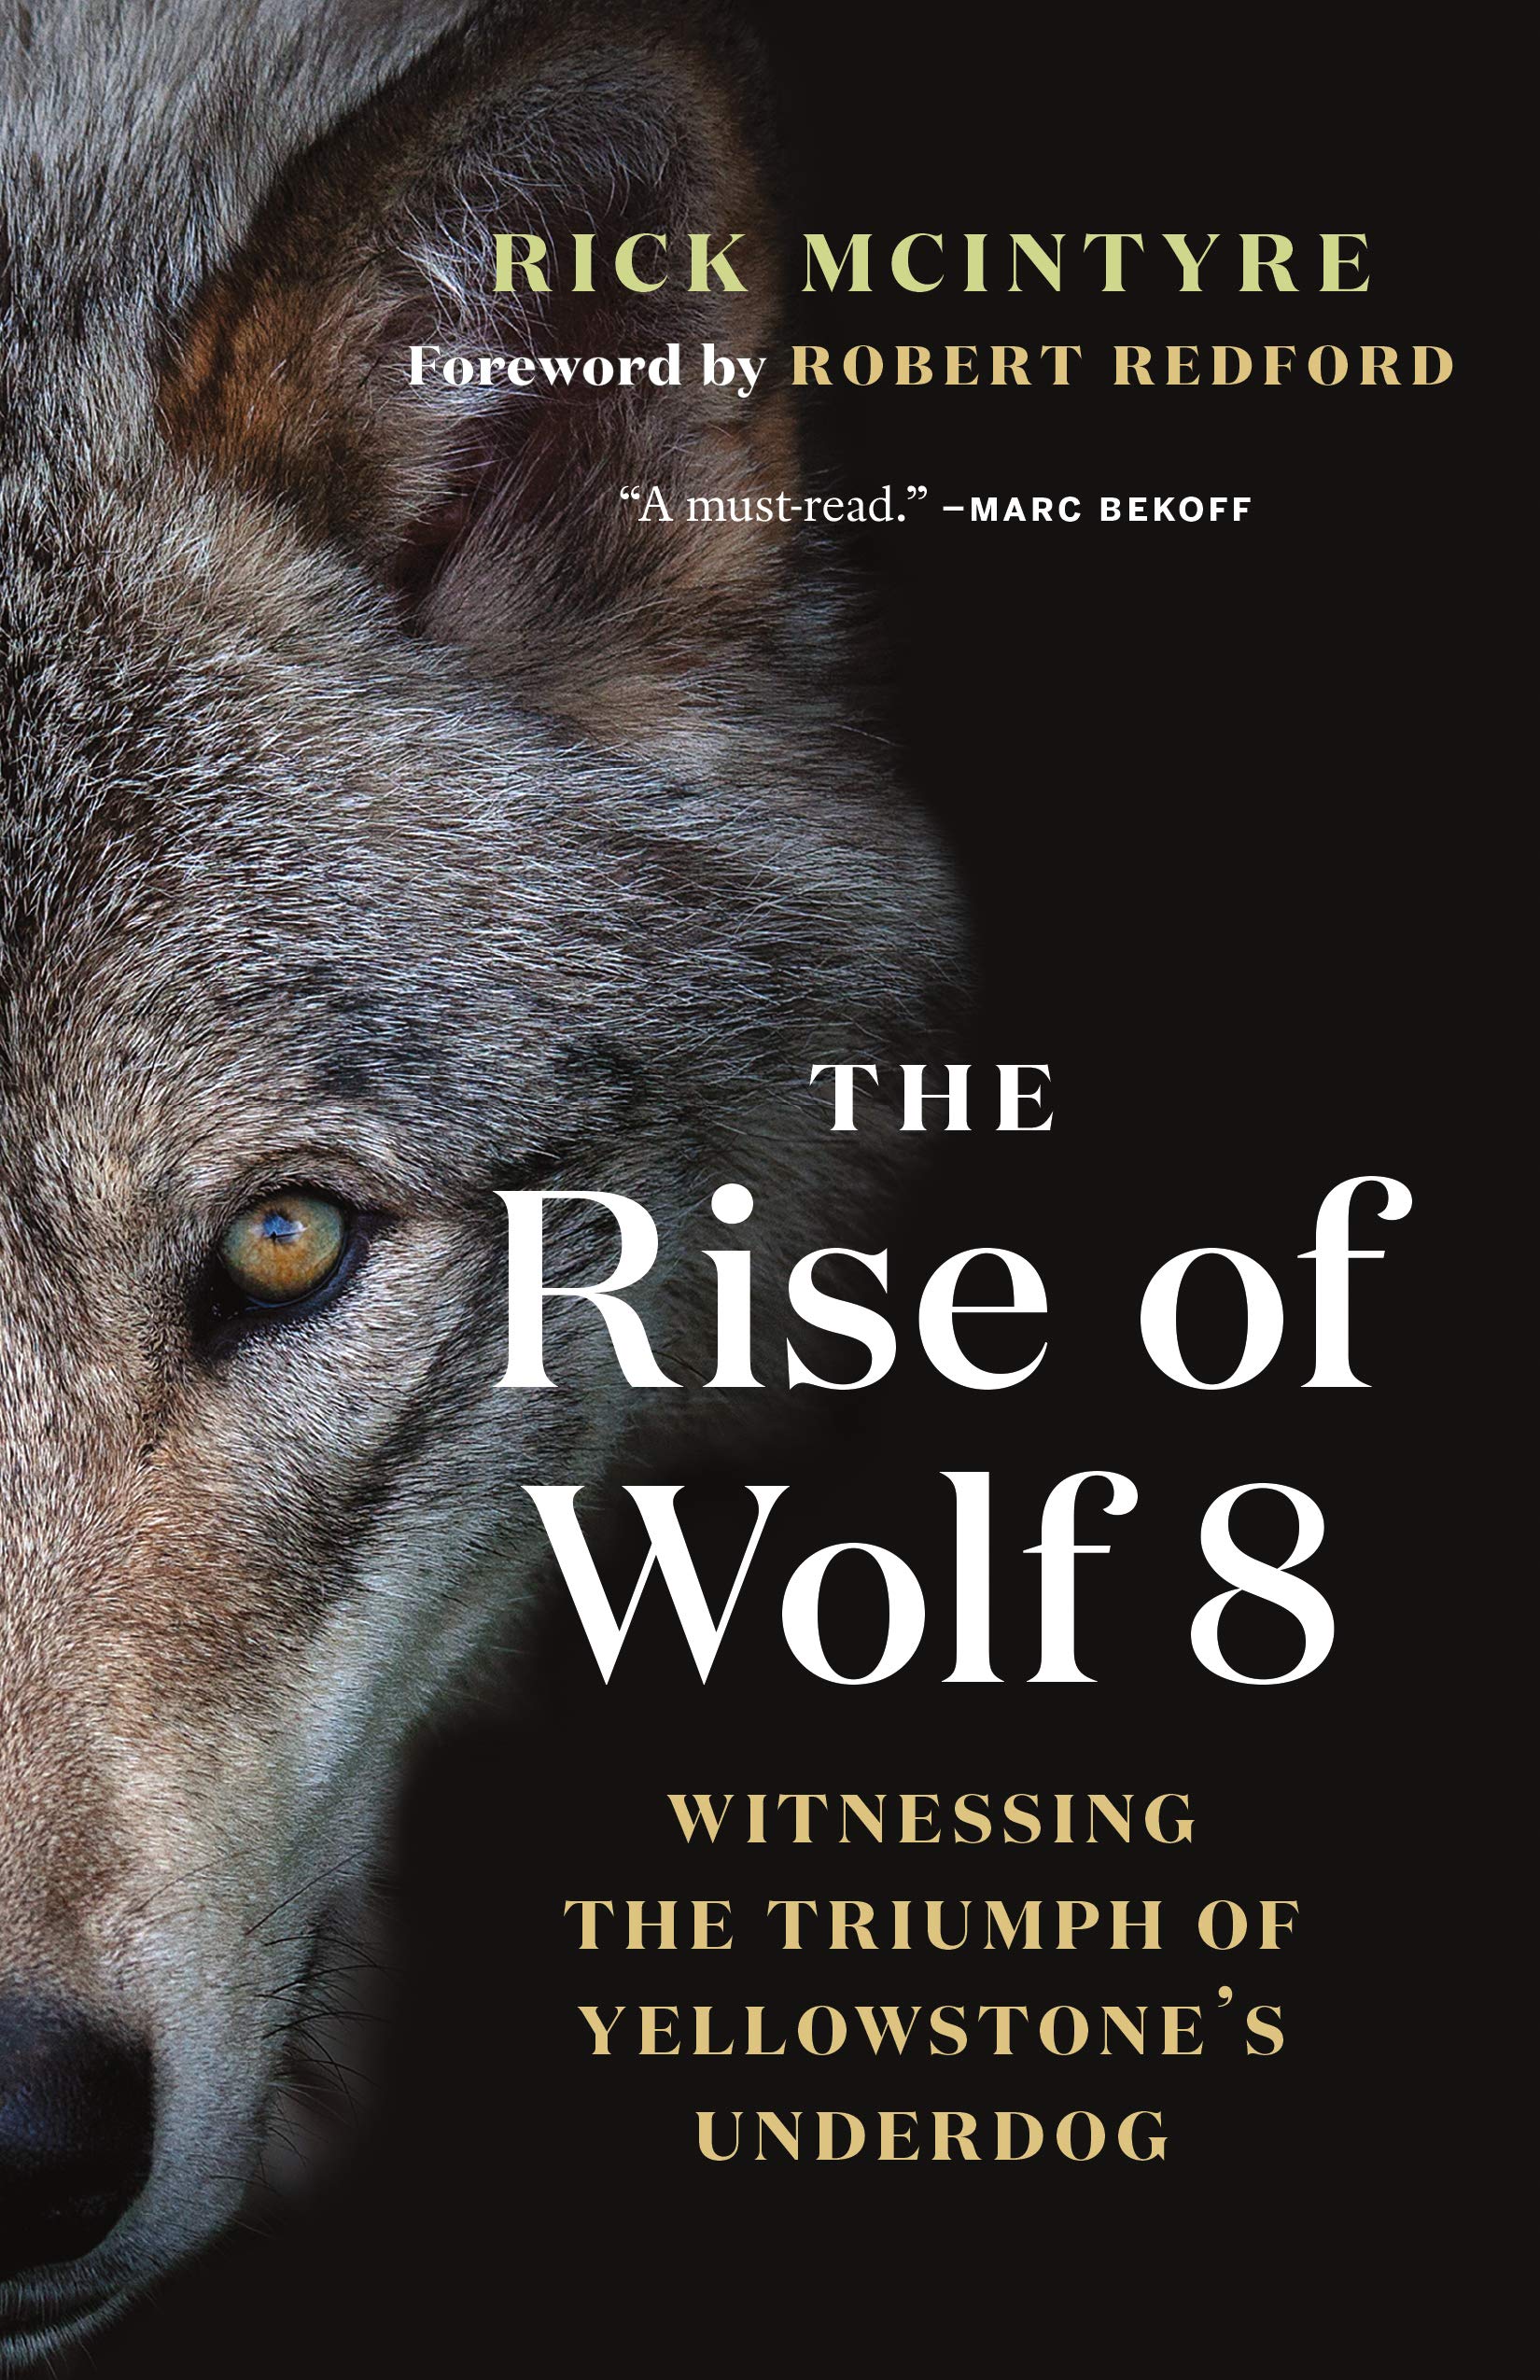 Cover of "The Rise of Wolf 8"